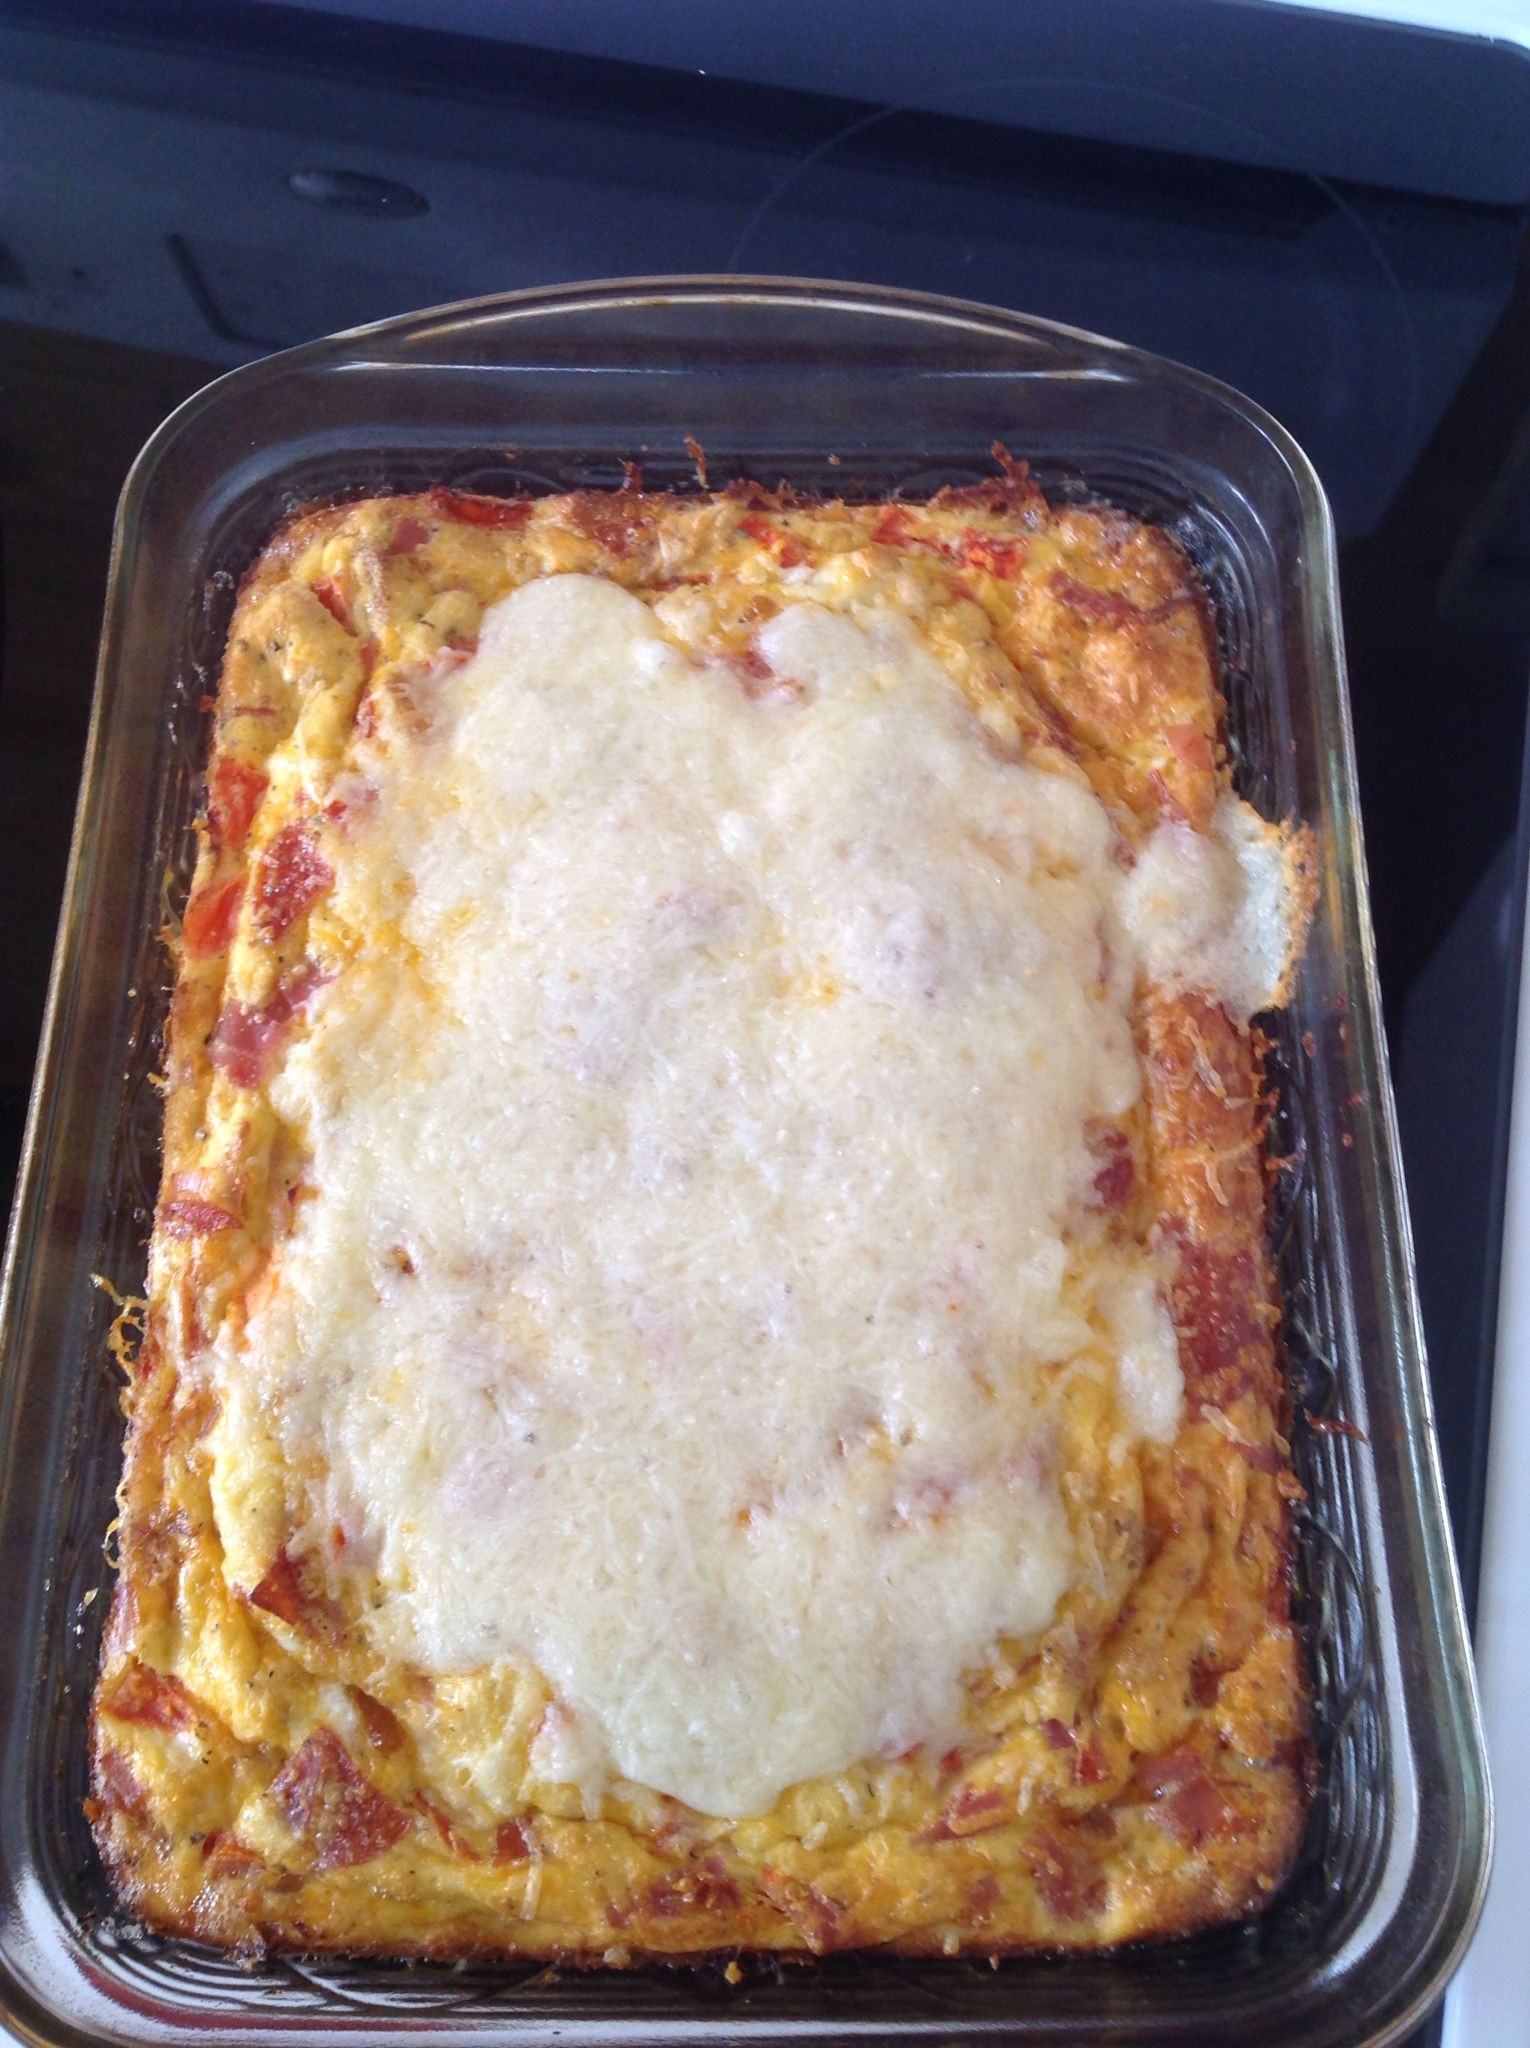 Breakfast Casserole With Bread Slices
 Pizza Breakfast Casserole 12 eggs 4 slices of white